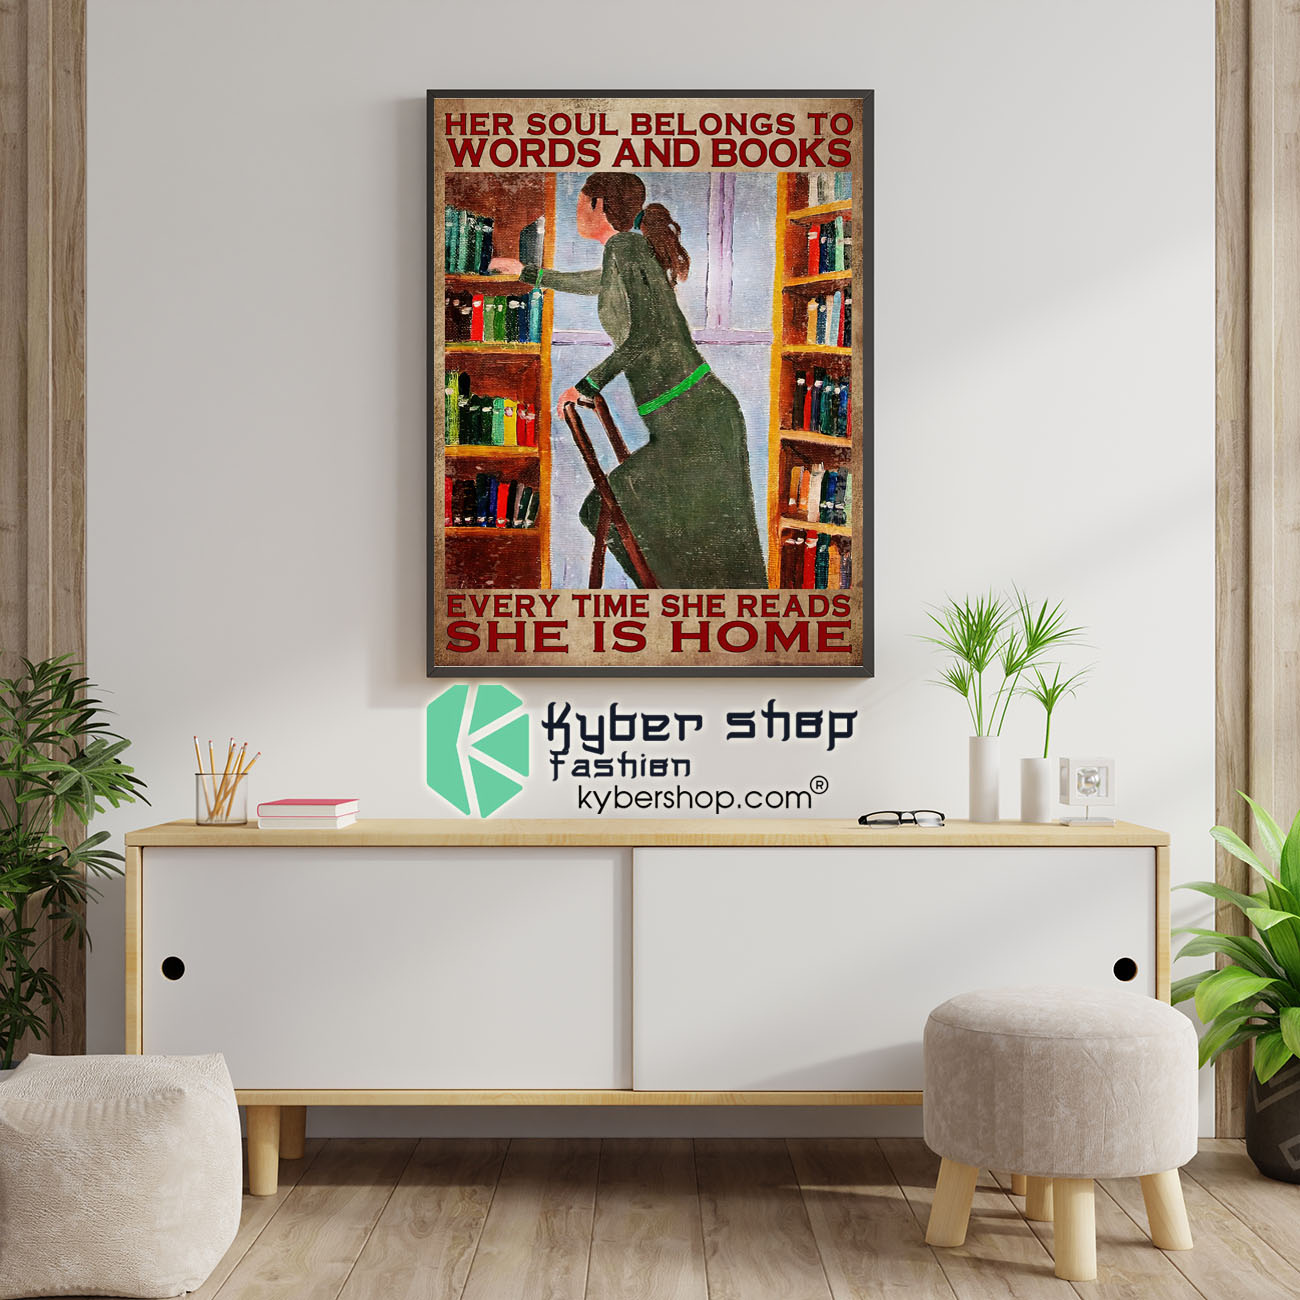 Her Soul Belongs To Words And Books Every Time She Reads She Is Home Poster 1